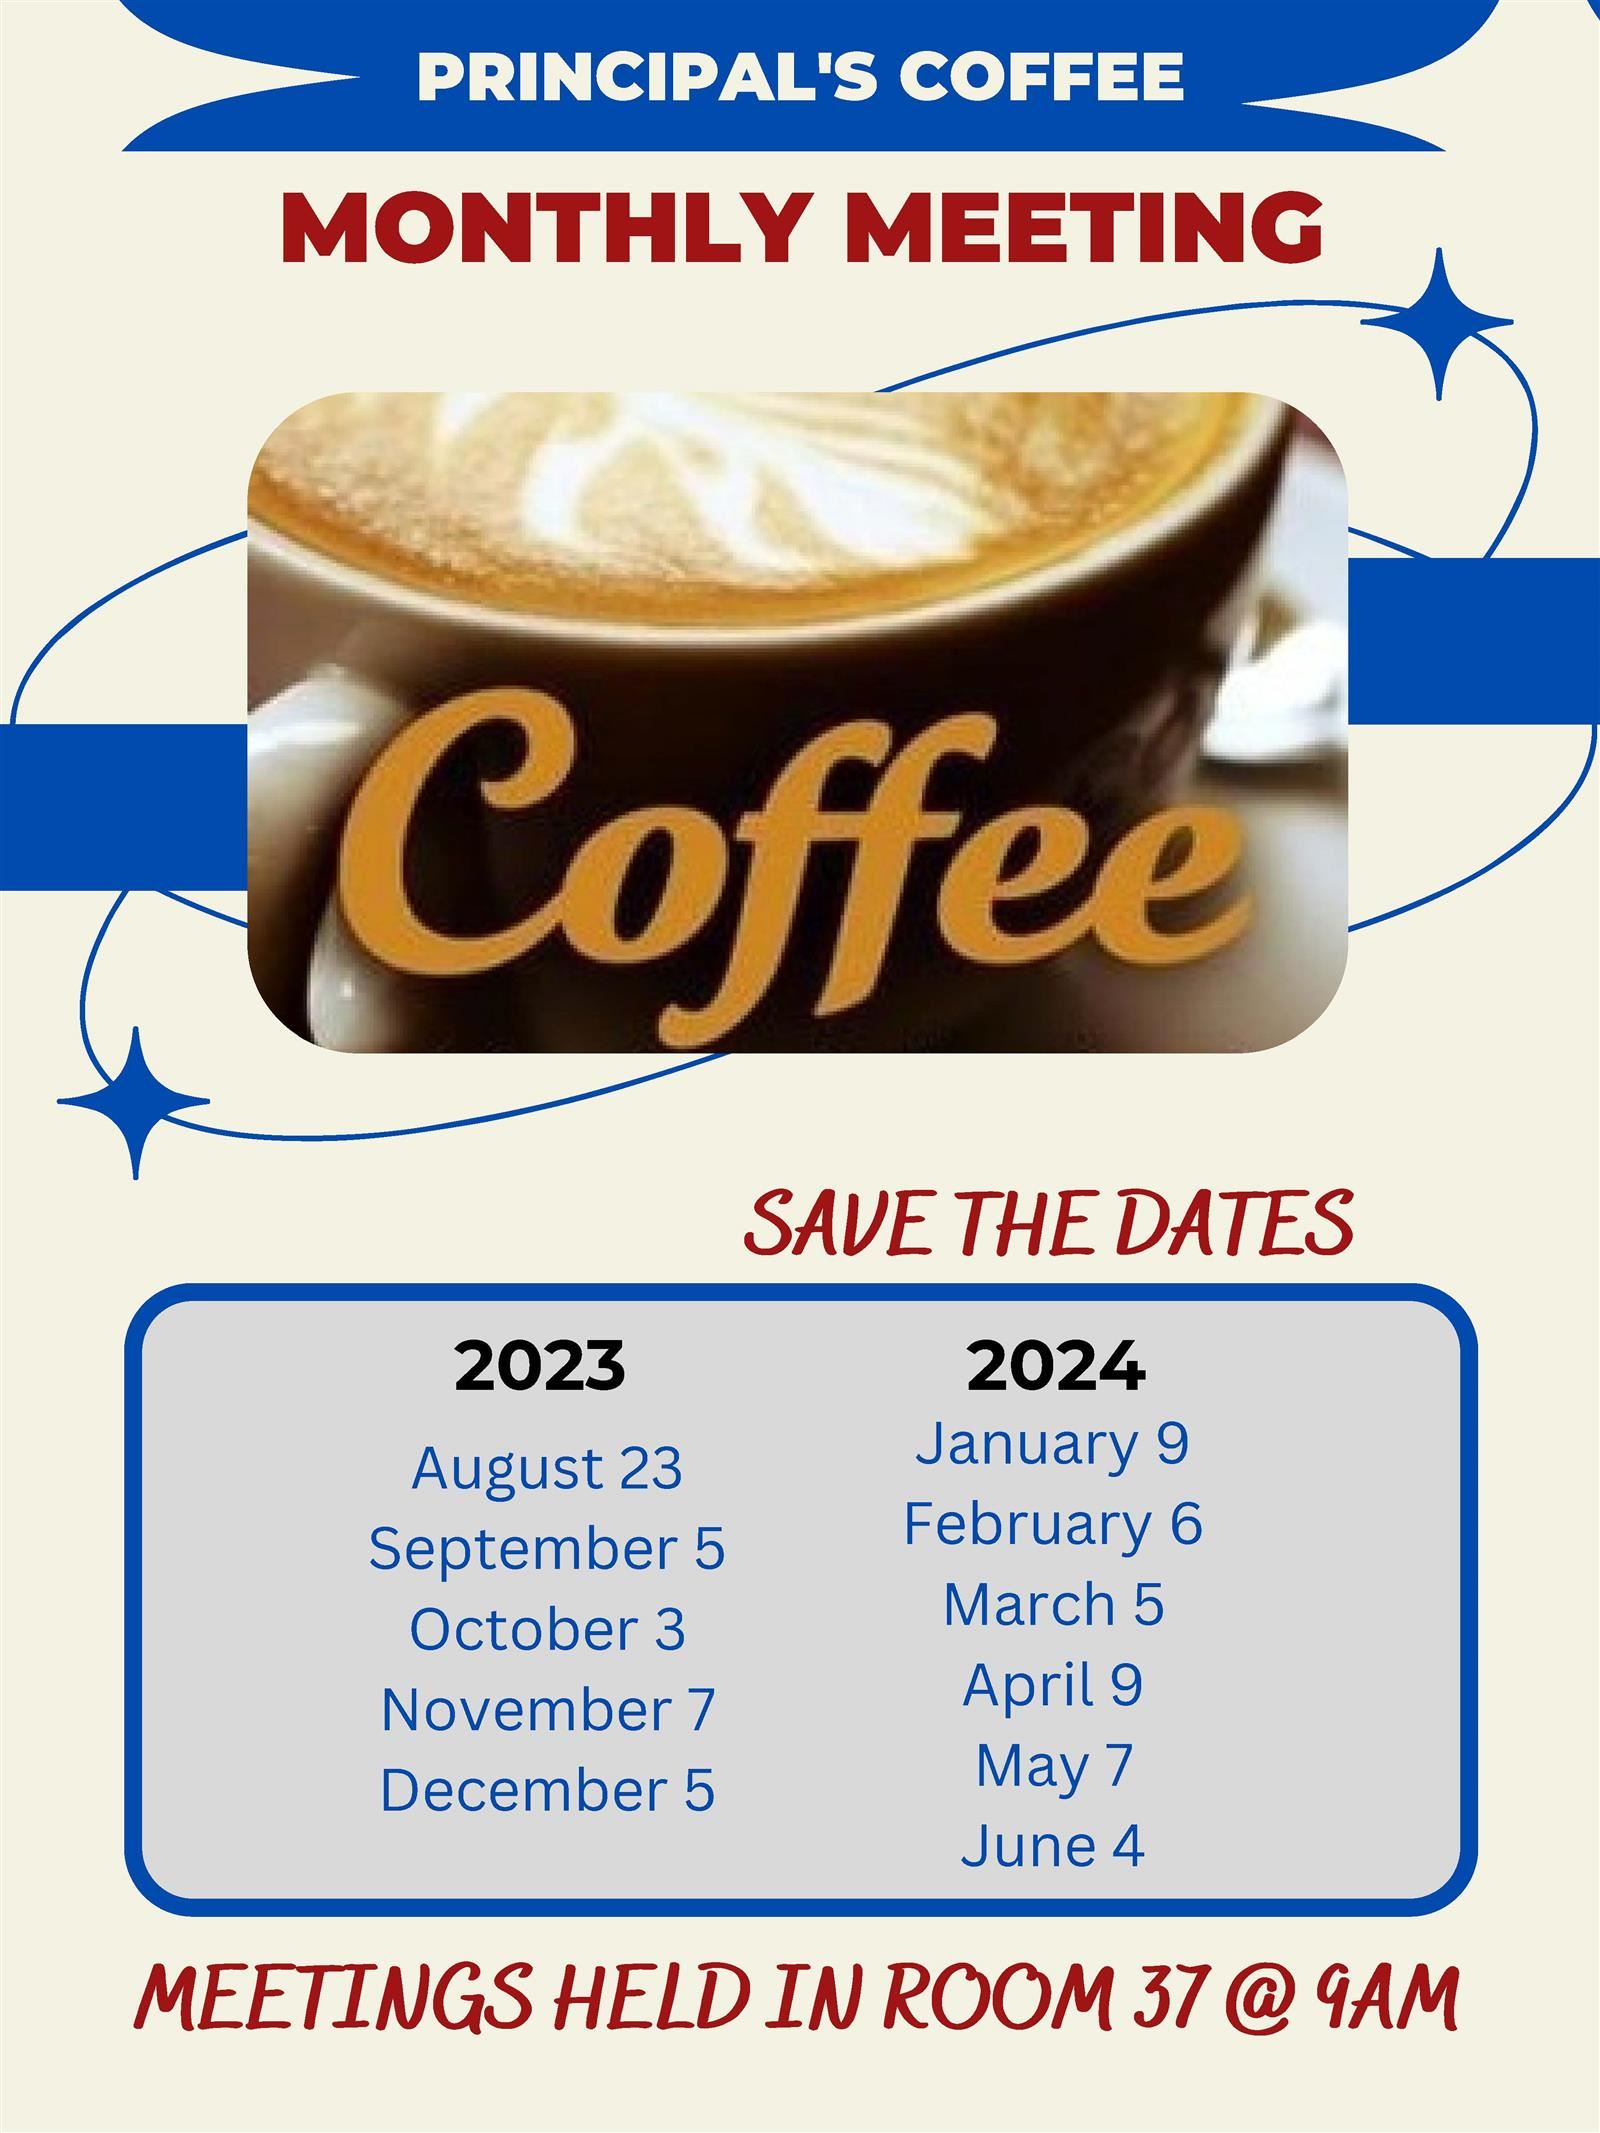 Principal's Coffee Monthly Meeting